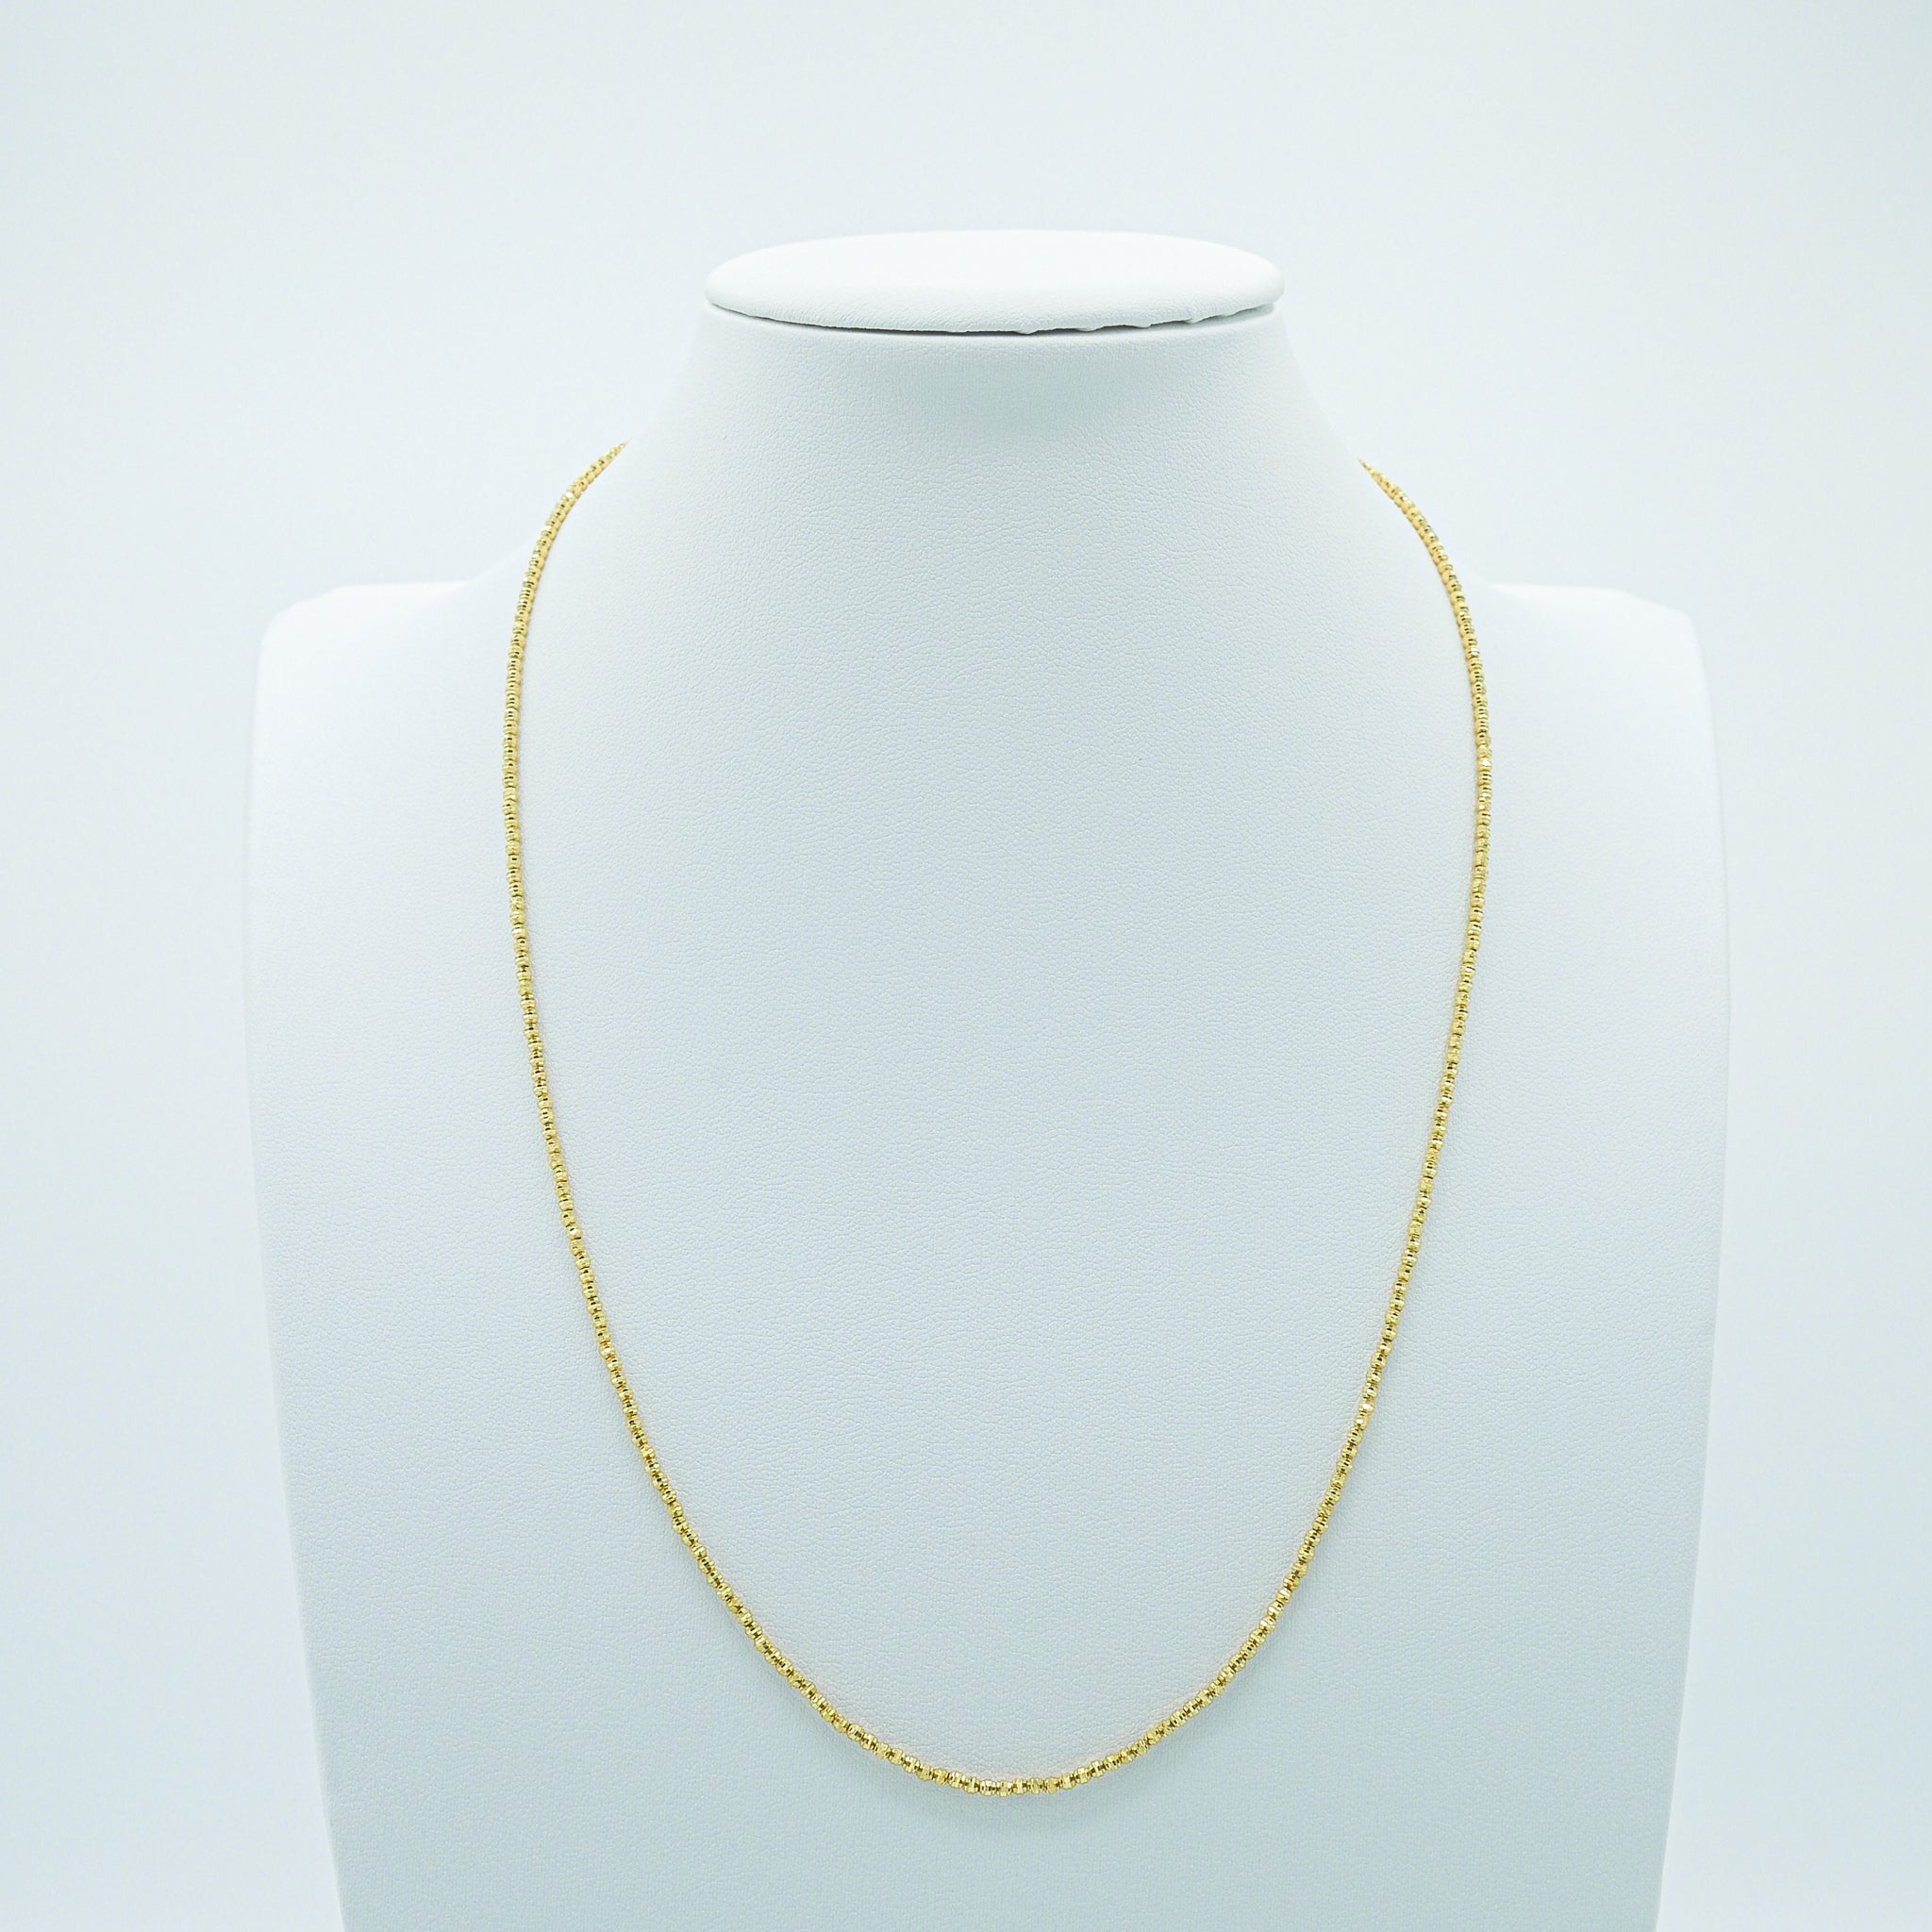 14K Solid Yellow Gold Ball Chain